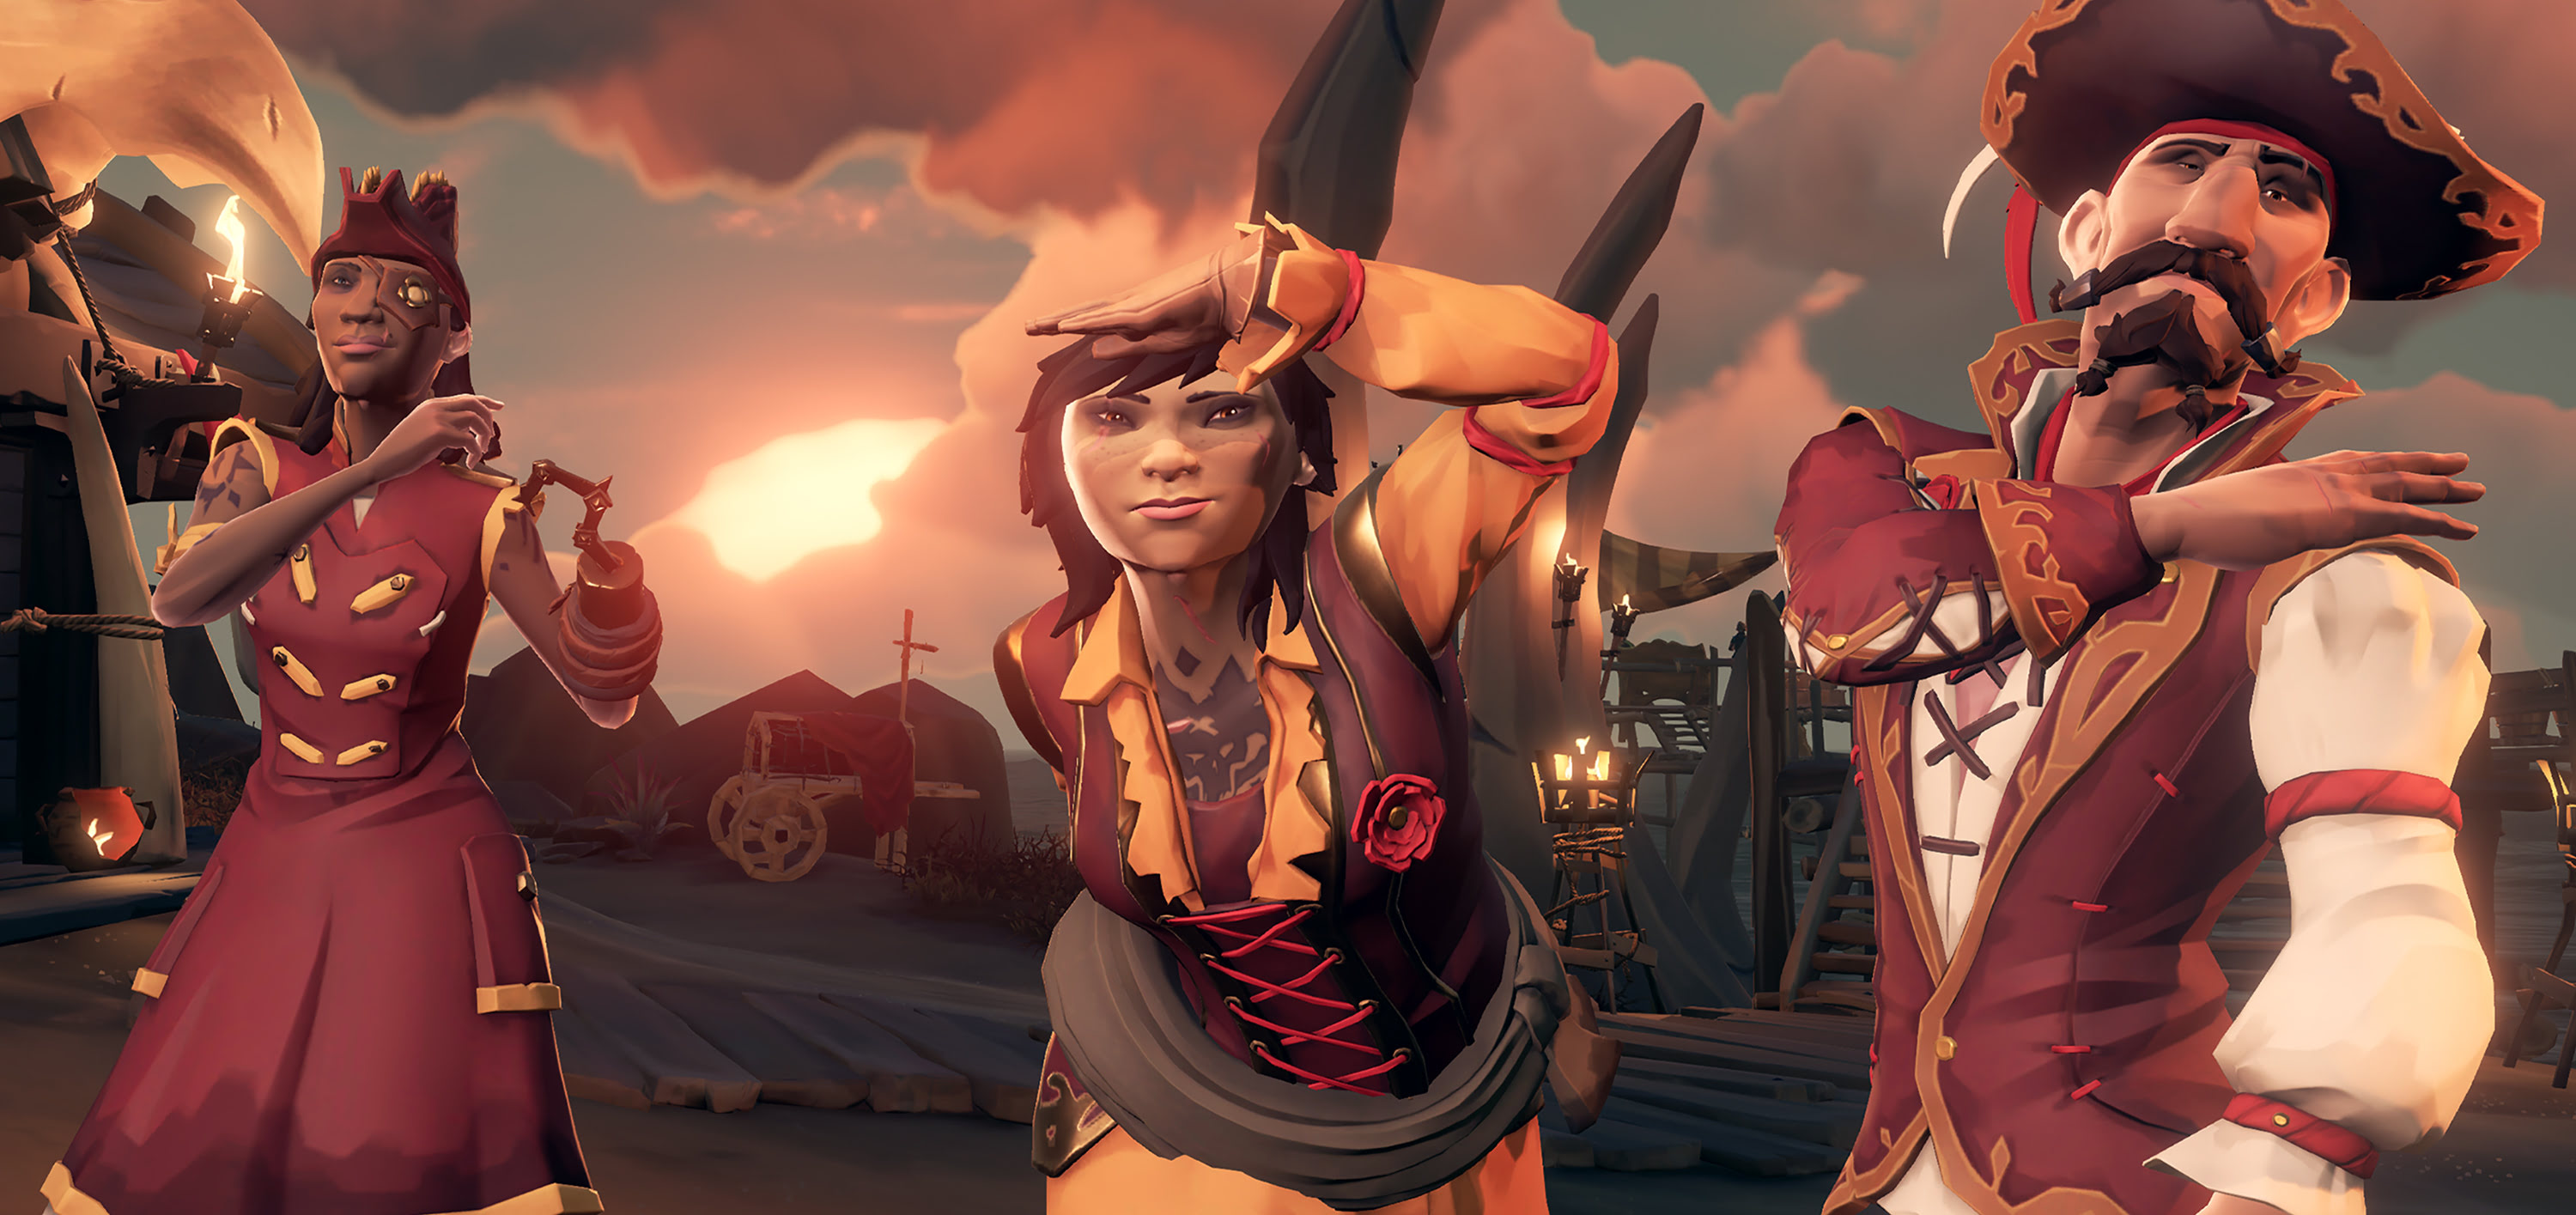 Sea of Thieves Welcome to Sea of Thieves on Xbox One Windows 10. 